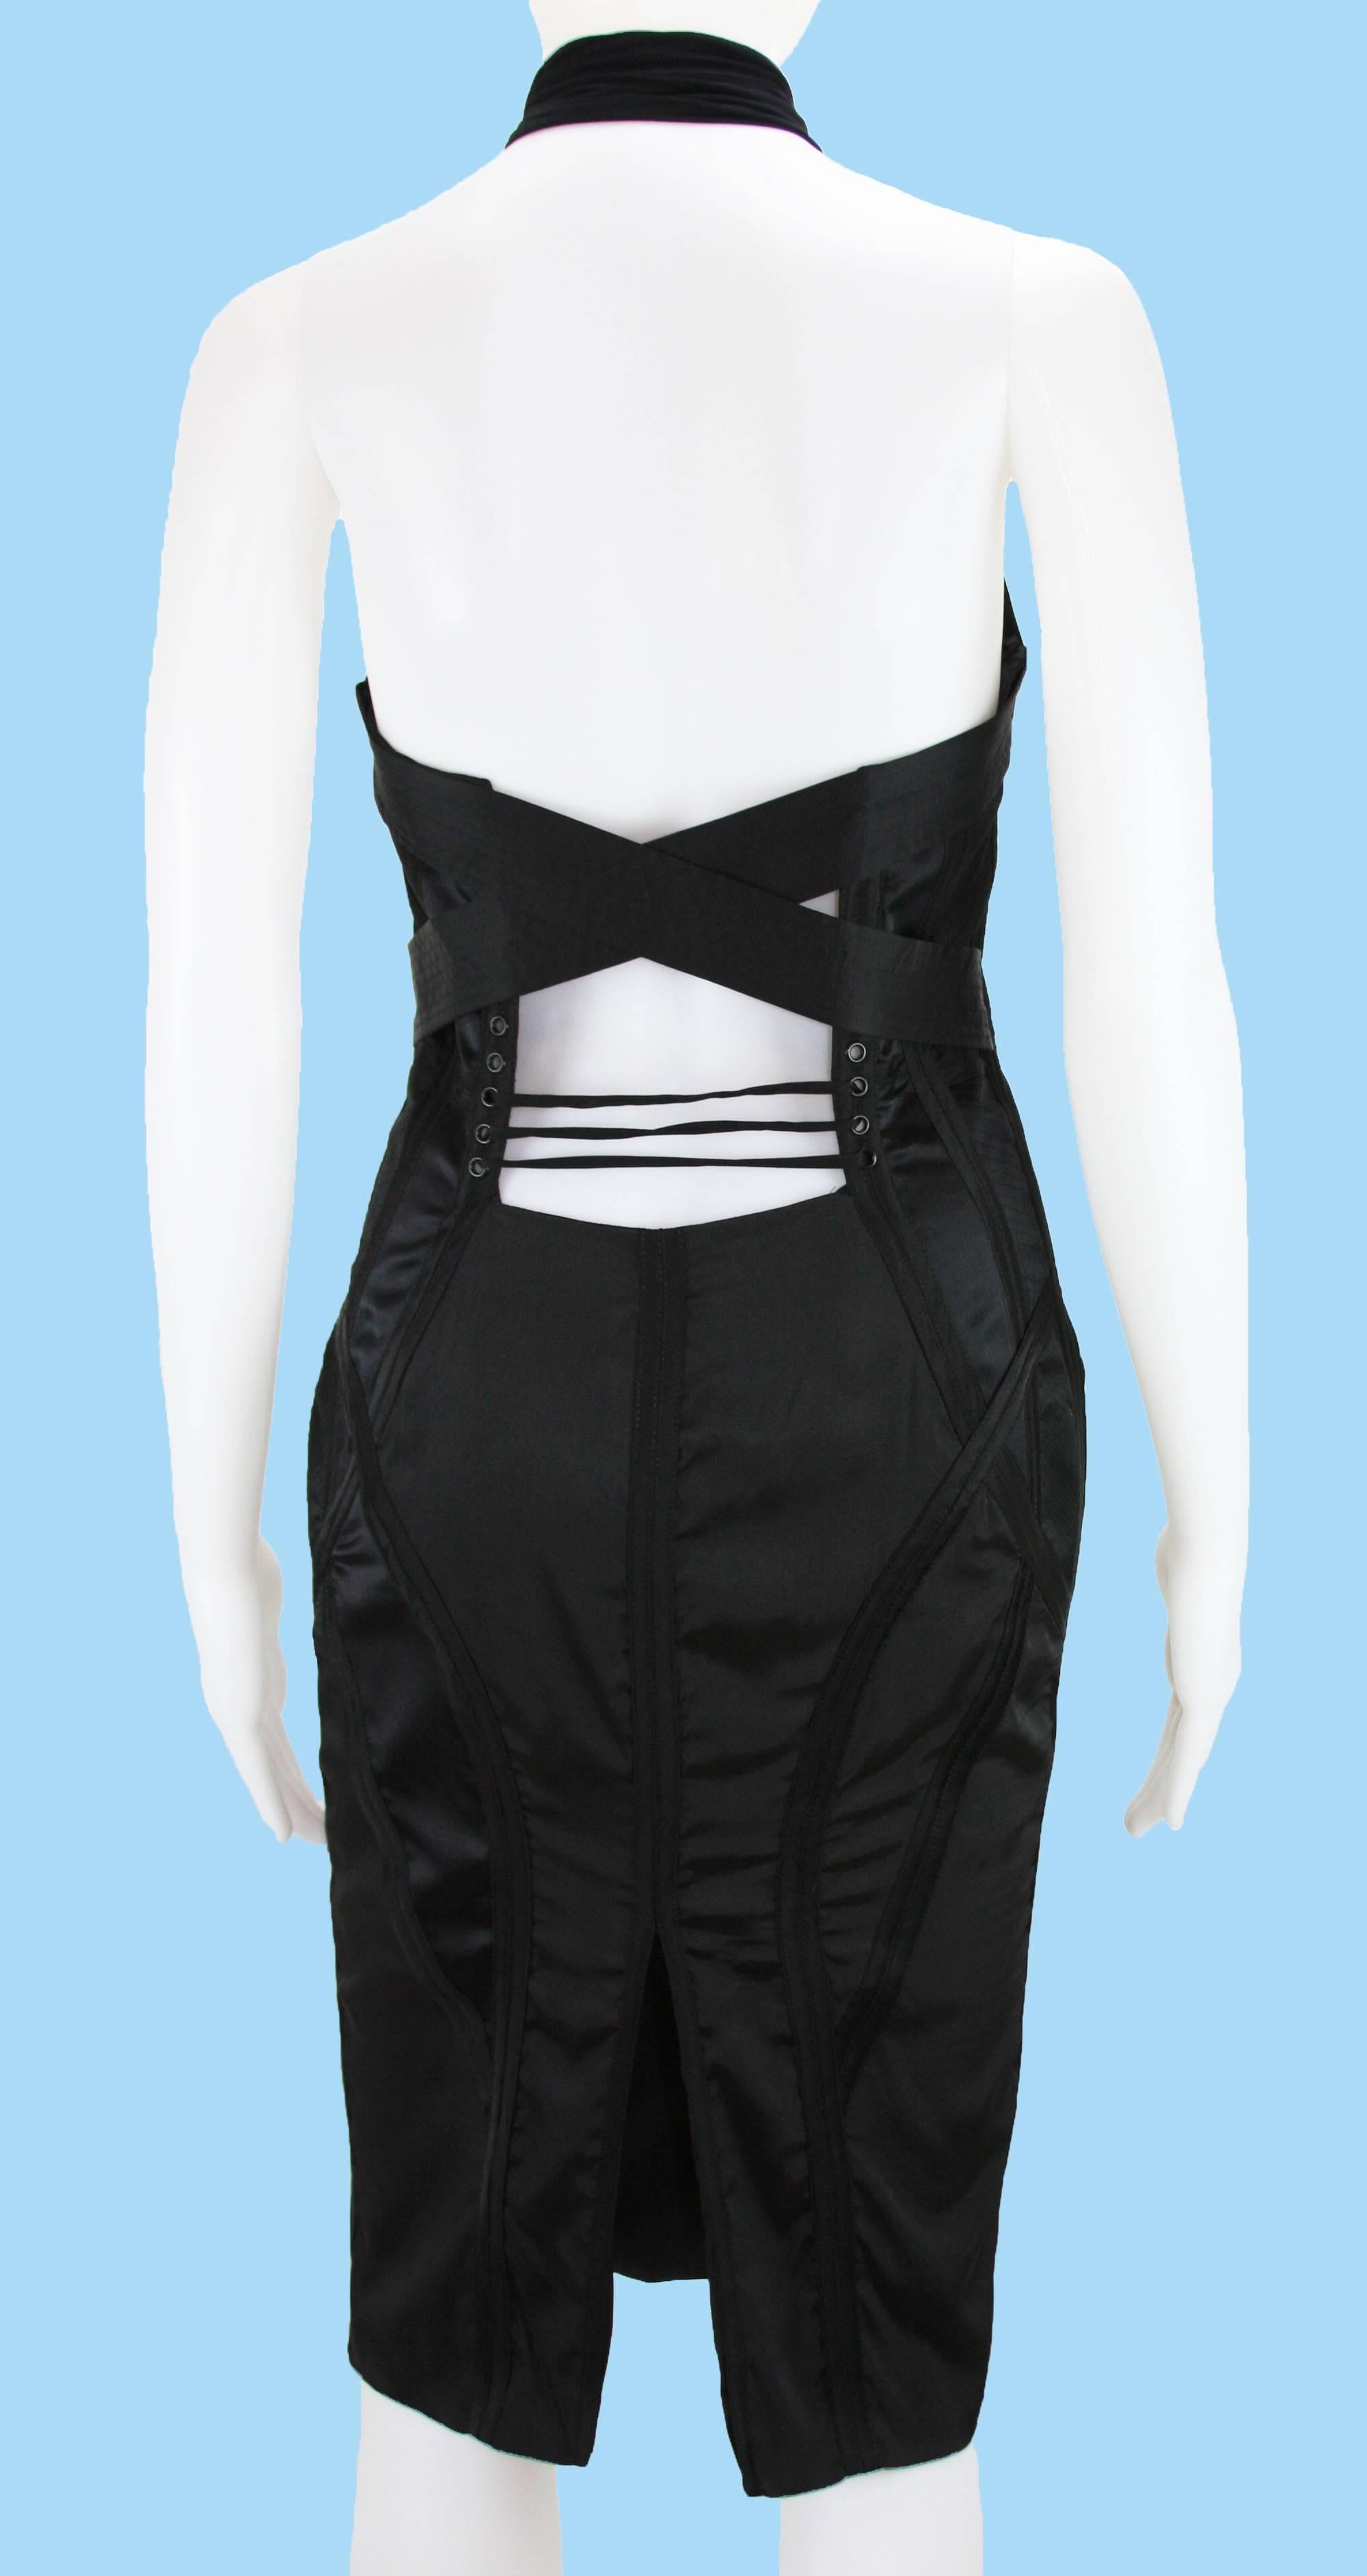 Women's 2003 TOM FORD for GUCCI BLACK CORSET DRESS